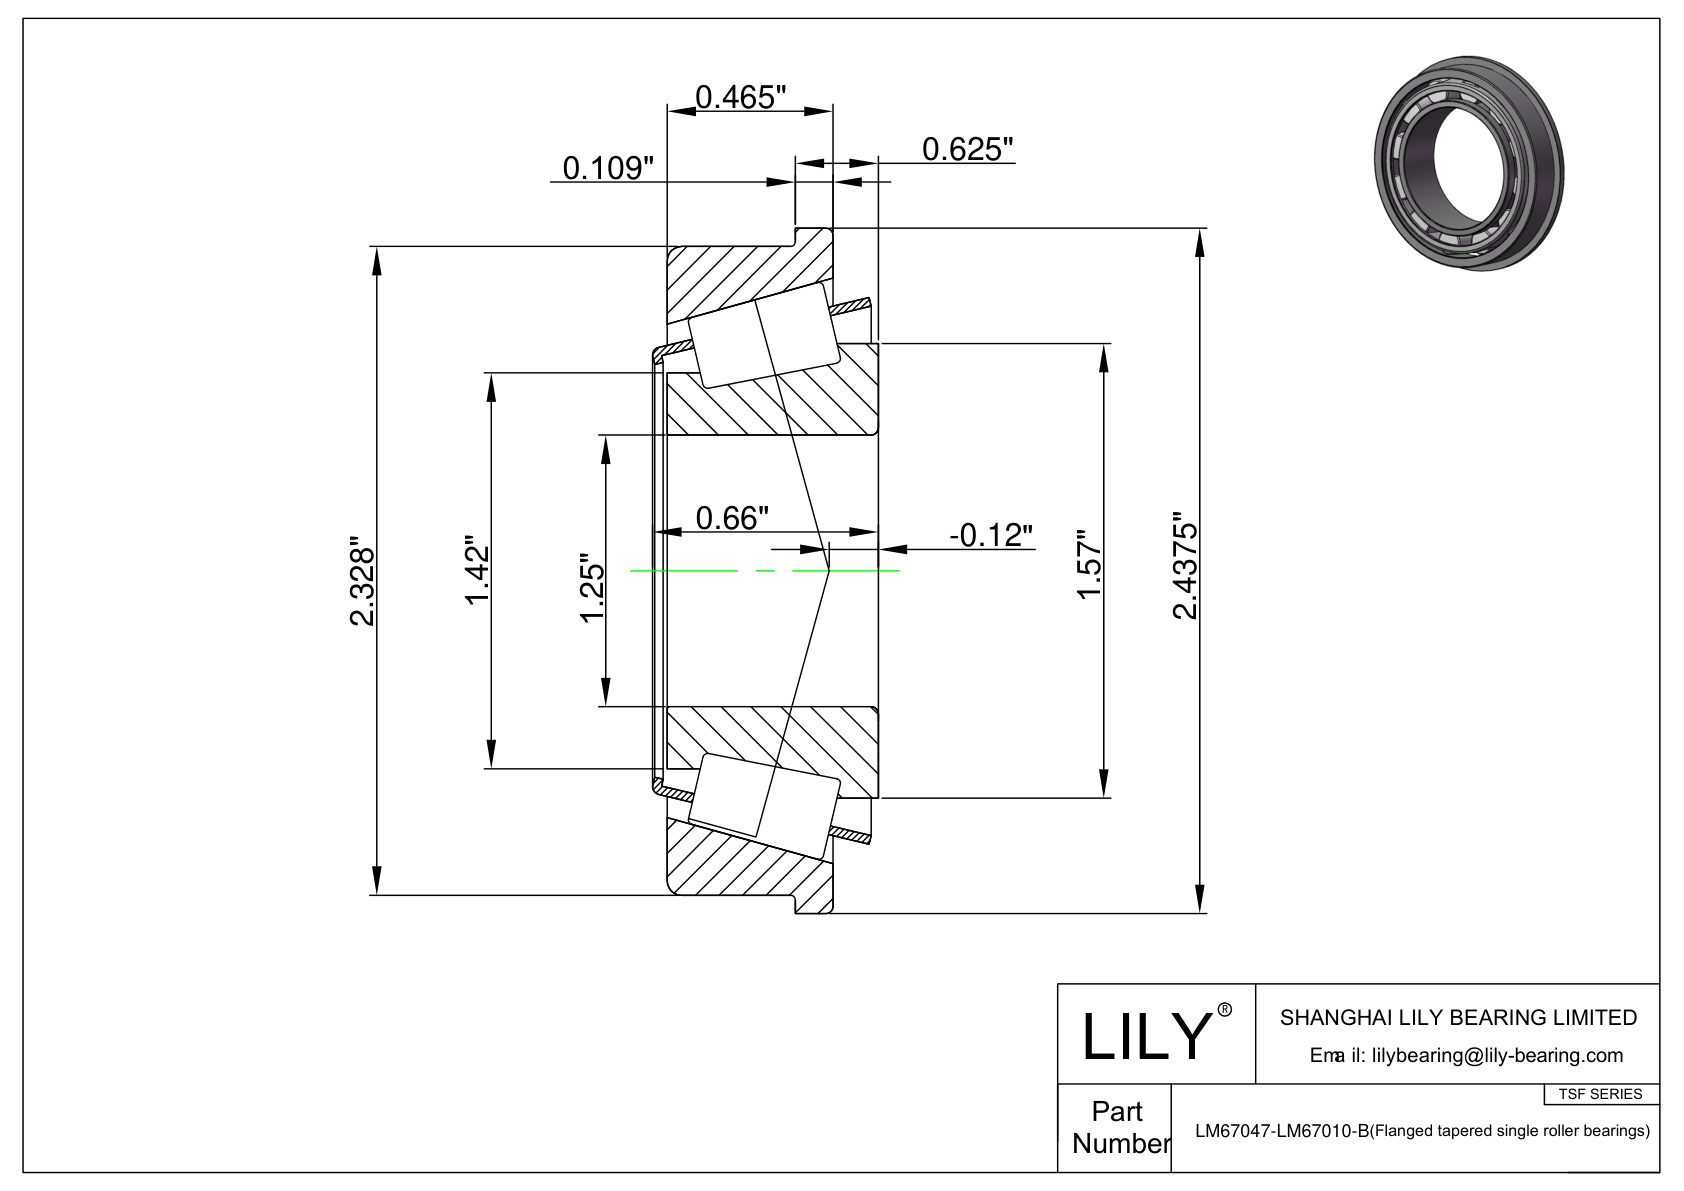 LM67047-LM67010-B TSF (Tapered Single Roller Bearings with Flange) (Imperial) cad drawing